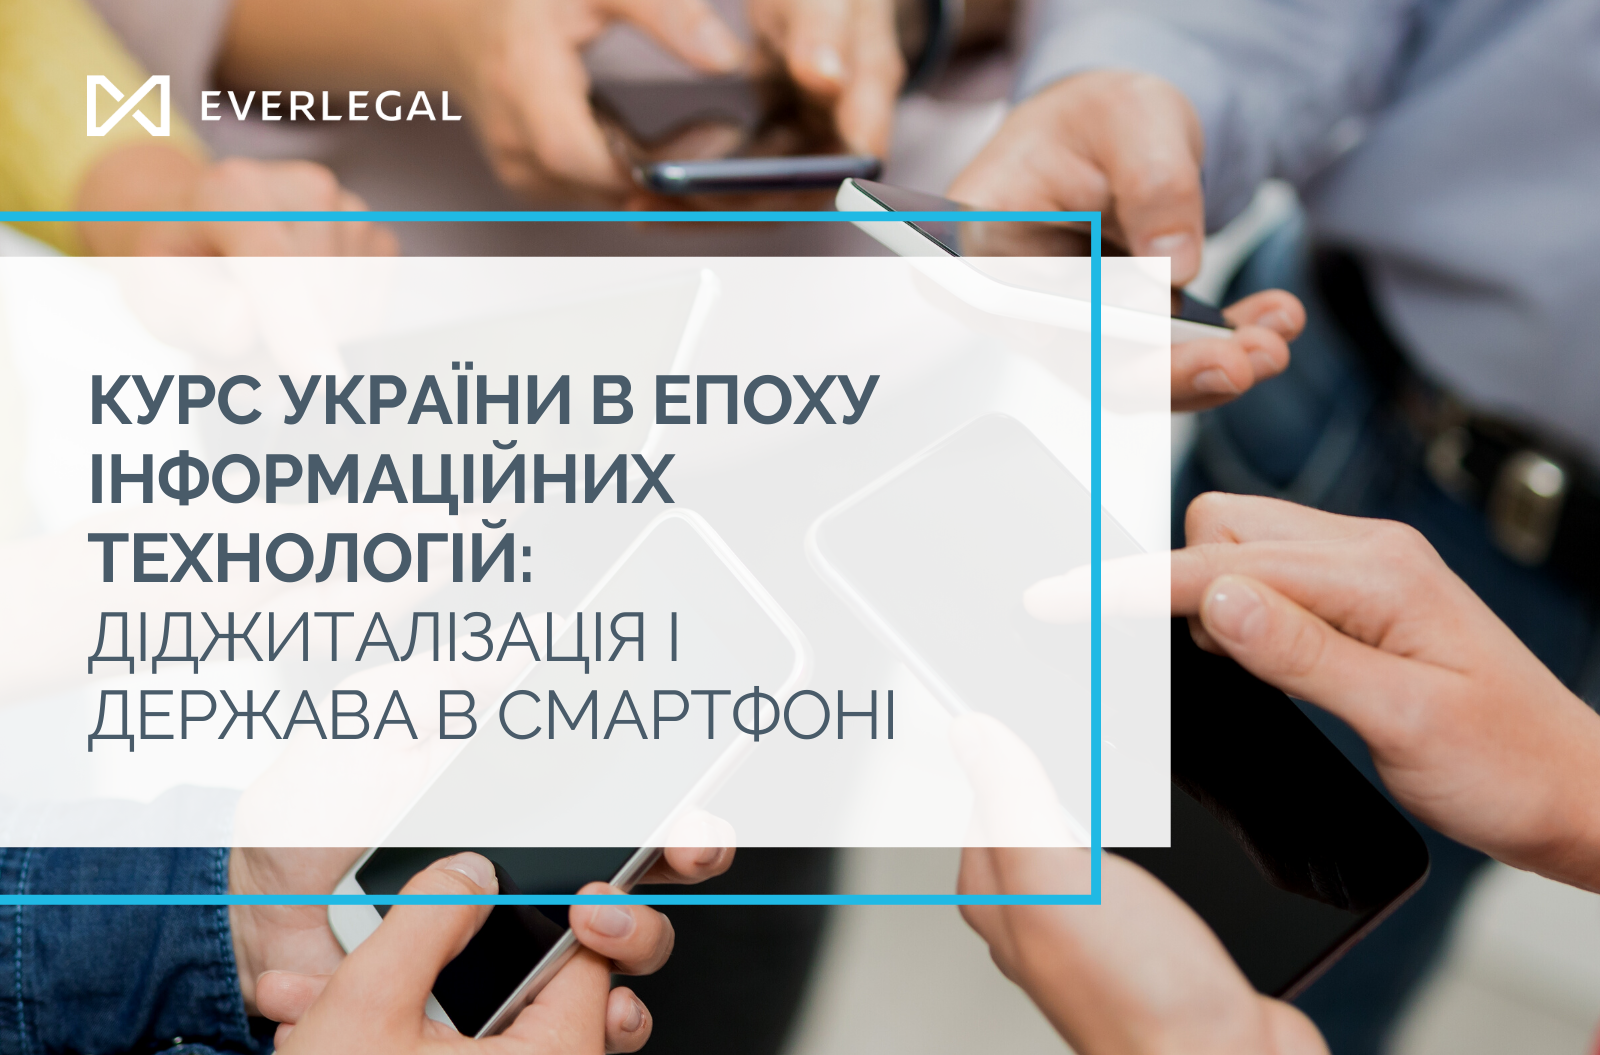 The course of Ukraine in the era of information technology: digitalization and the state in a smartphone